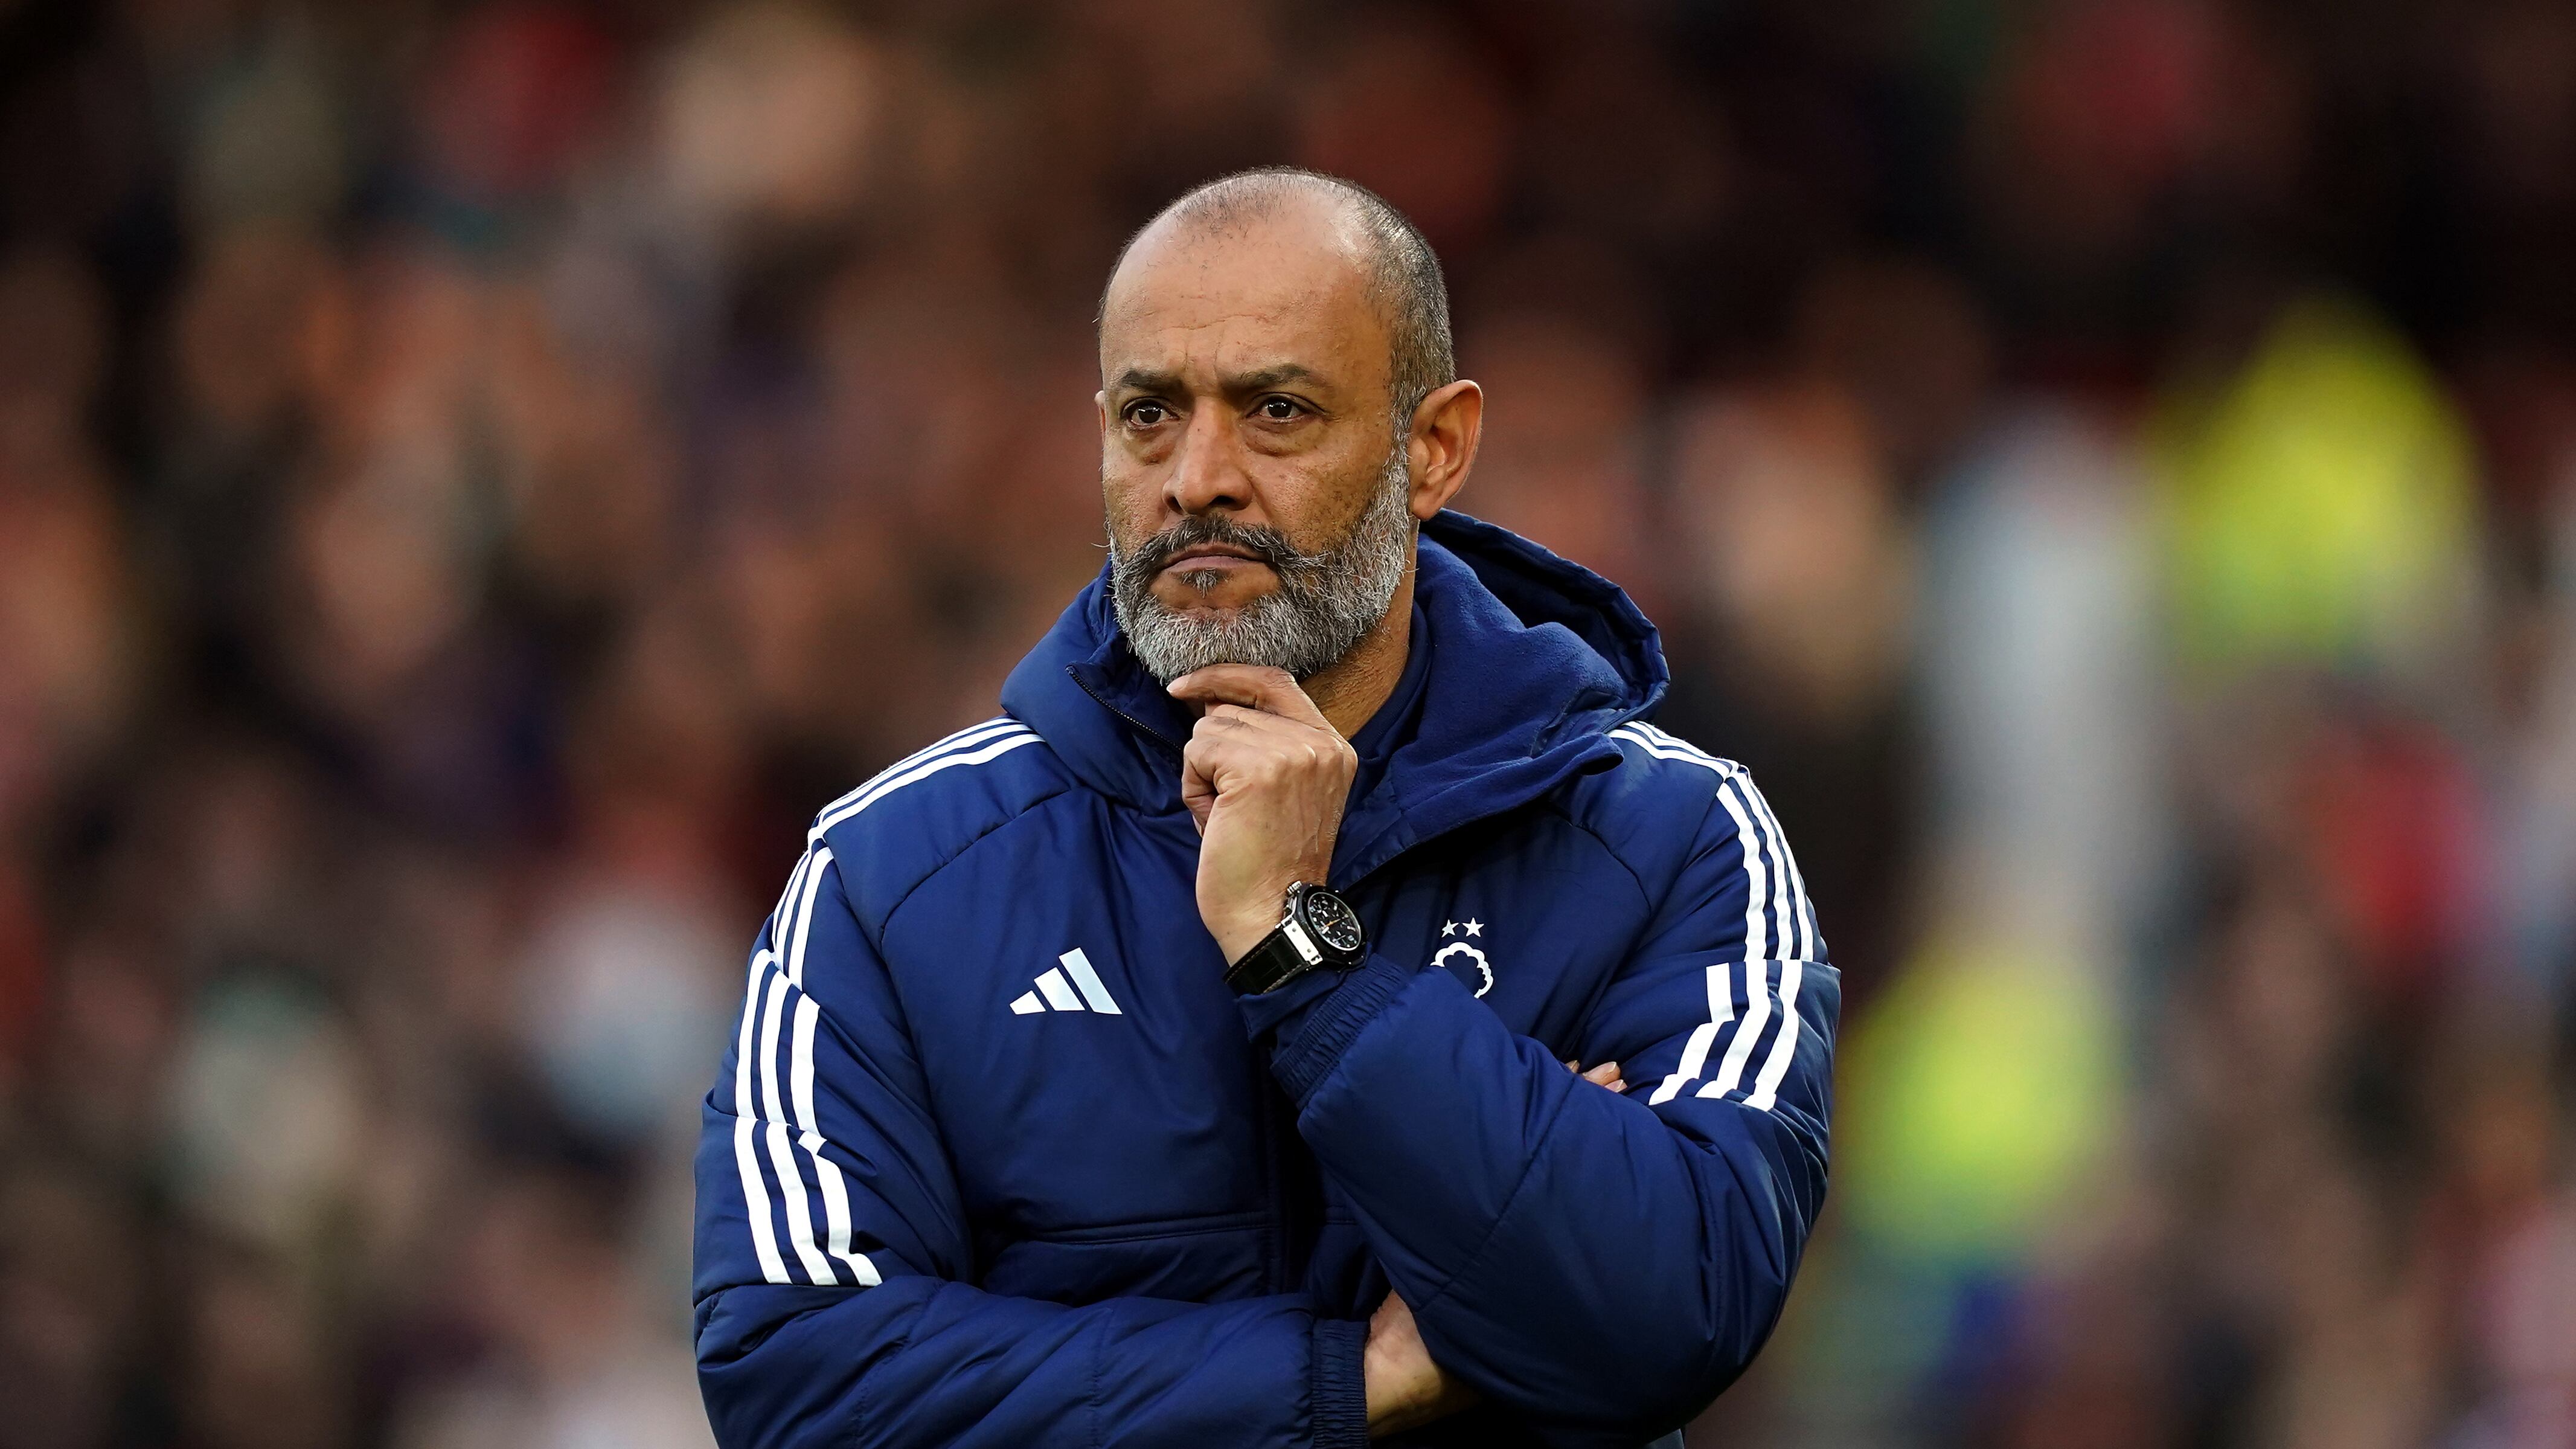 Nuno Espirito Santo lost his first game in charge of Forest